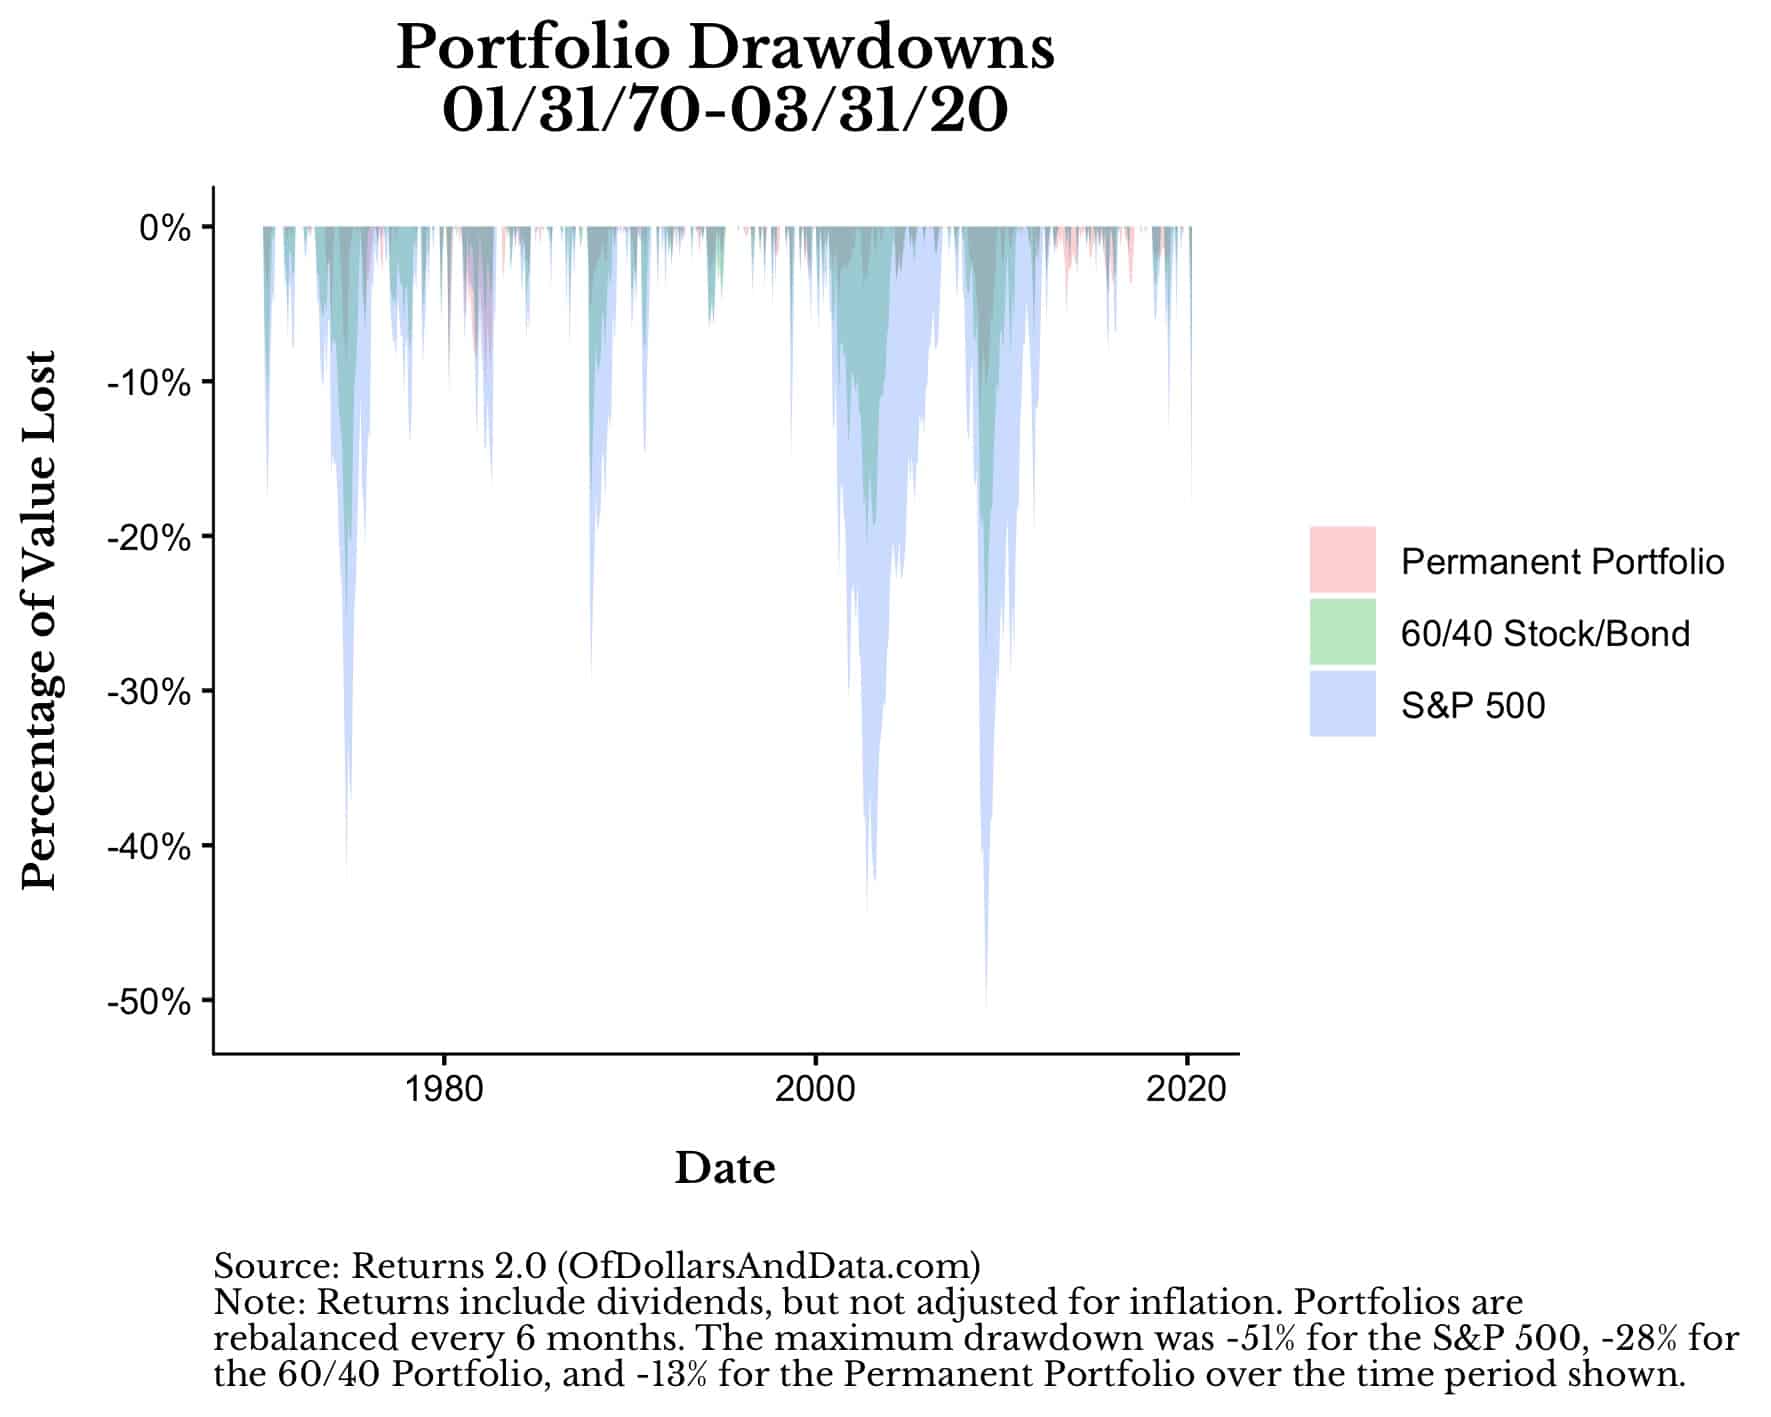 Drawdowns for the Permanent Portfolio, 60/40, and the S&P 500 from 1970 to 2020